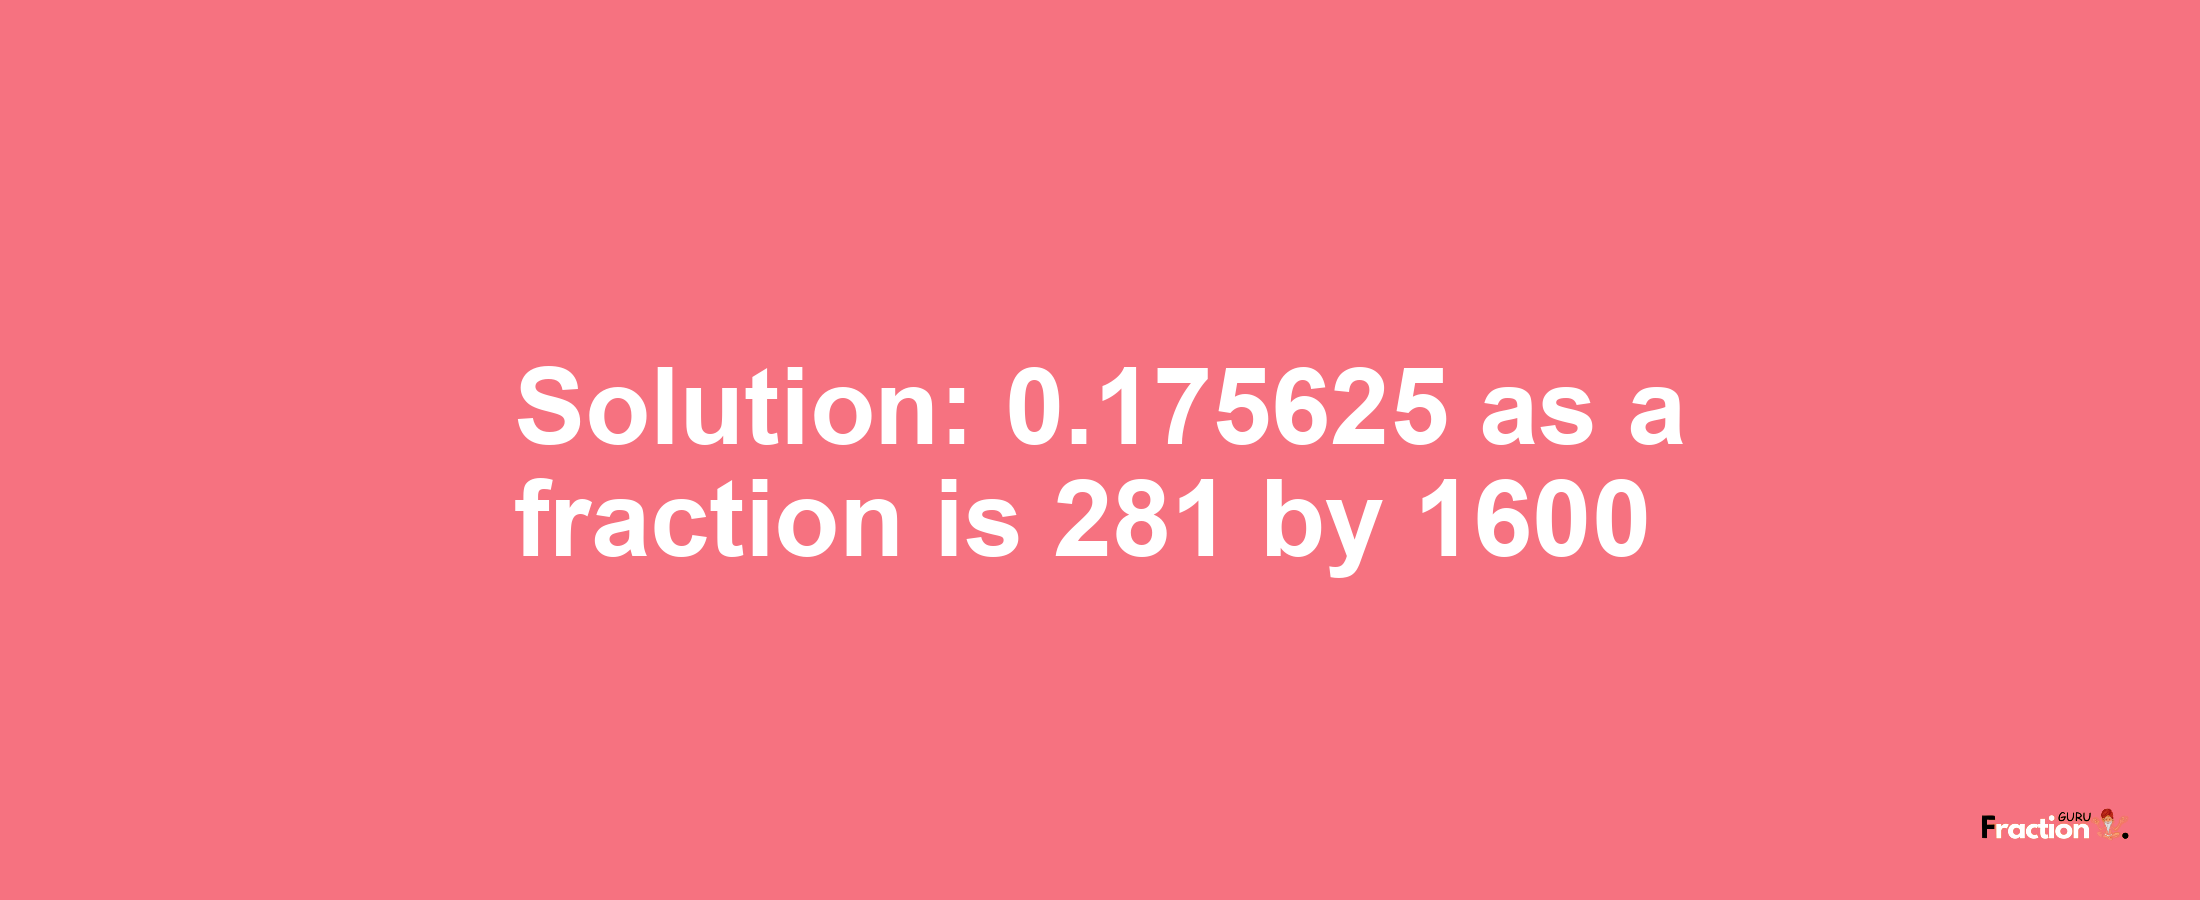 Solution:0.175625 as a fraction is 281/1600